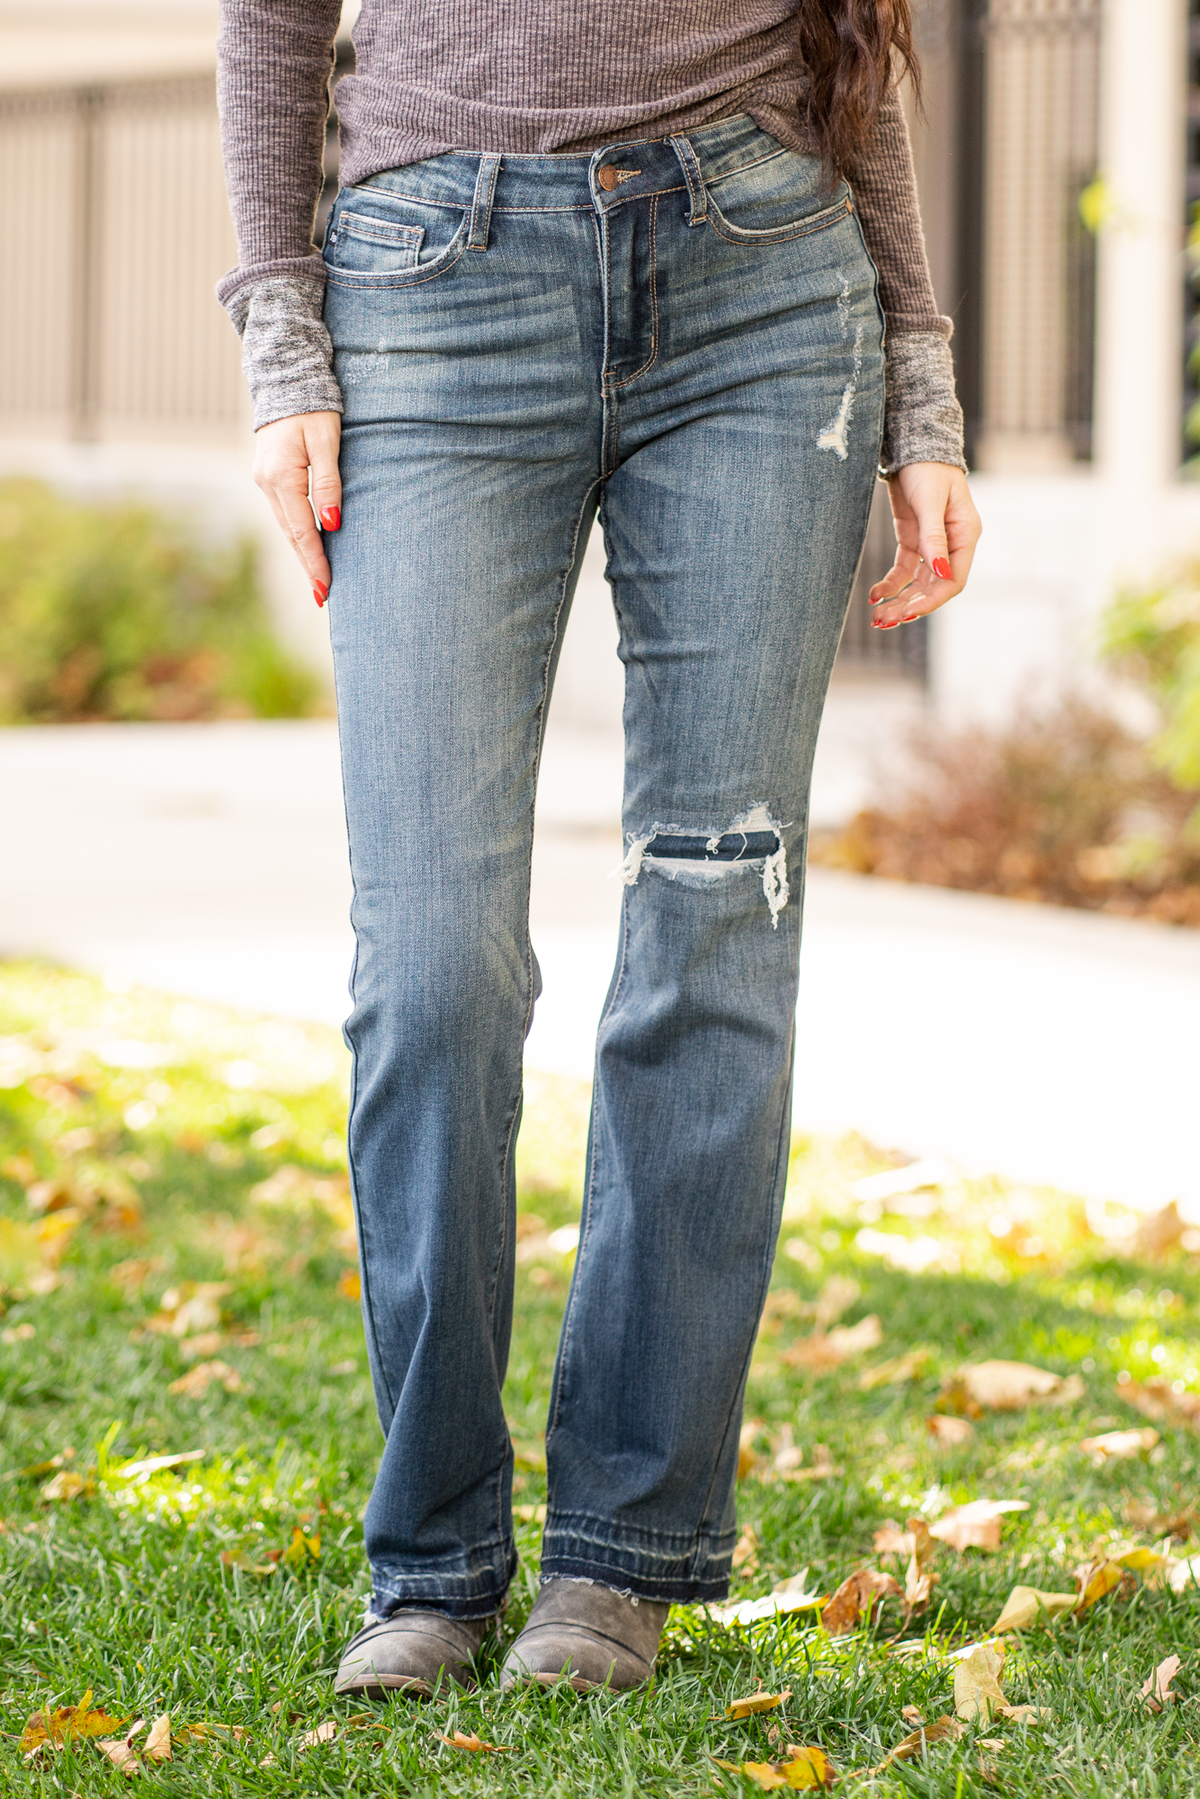 Judy Blue  Over your skinny jeans? The slim boot cuts will be your go to fit!  With a mid-waist, they hit you at the right spot on your tummy. Pair with some booties and a long sleeve henley for a cute and comfy look.   Color: Dark Wash Cut: Boot Cut, 32" Inseam Rise: Mid-Rise. 10.25" Front Rise Material: 66% COTTON,21% POLYESTER, 11% RAYON,2% SPANDEX Machine Wash Separately In Cold Water Stitching: Classic Fly: Zipper Style #: JB88314 , 88314